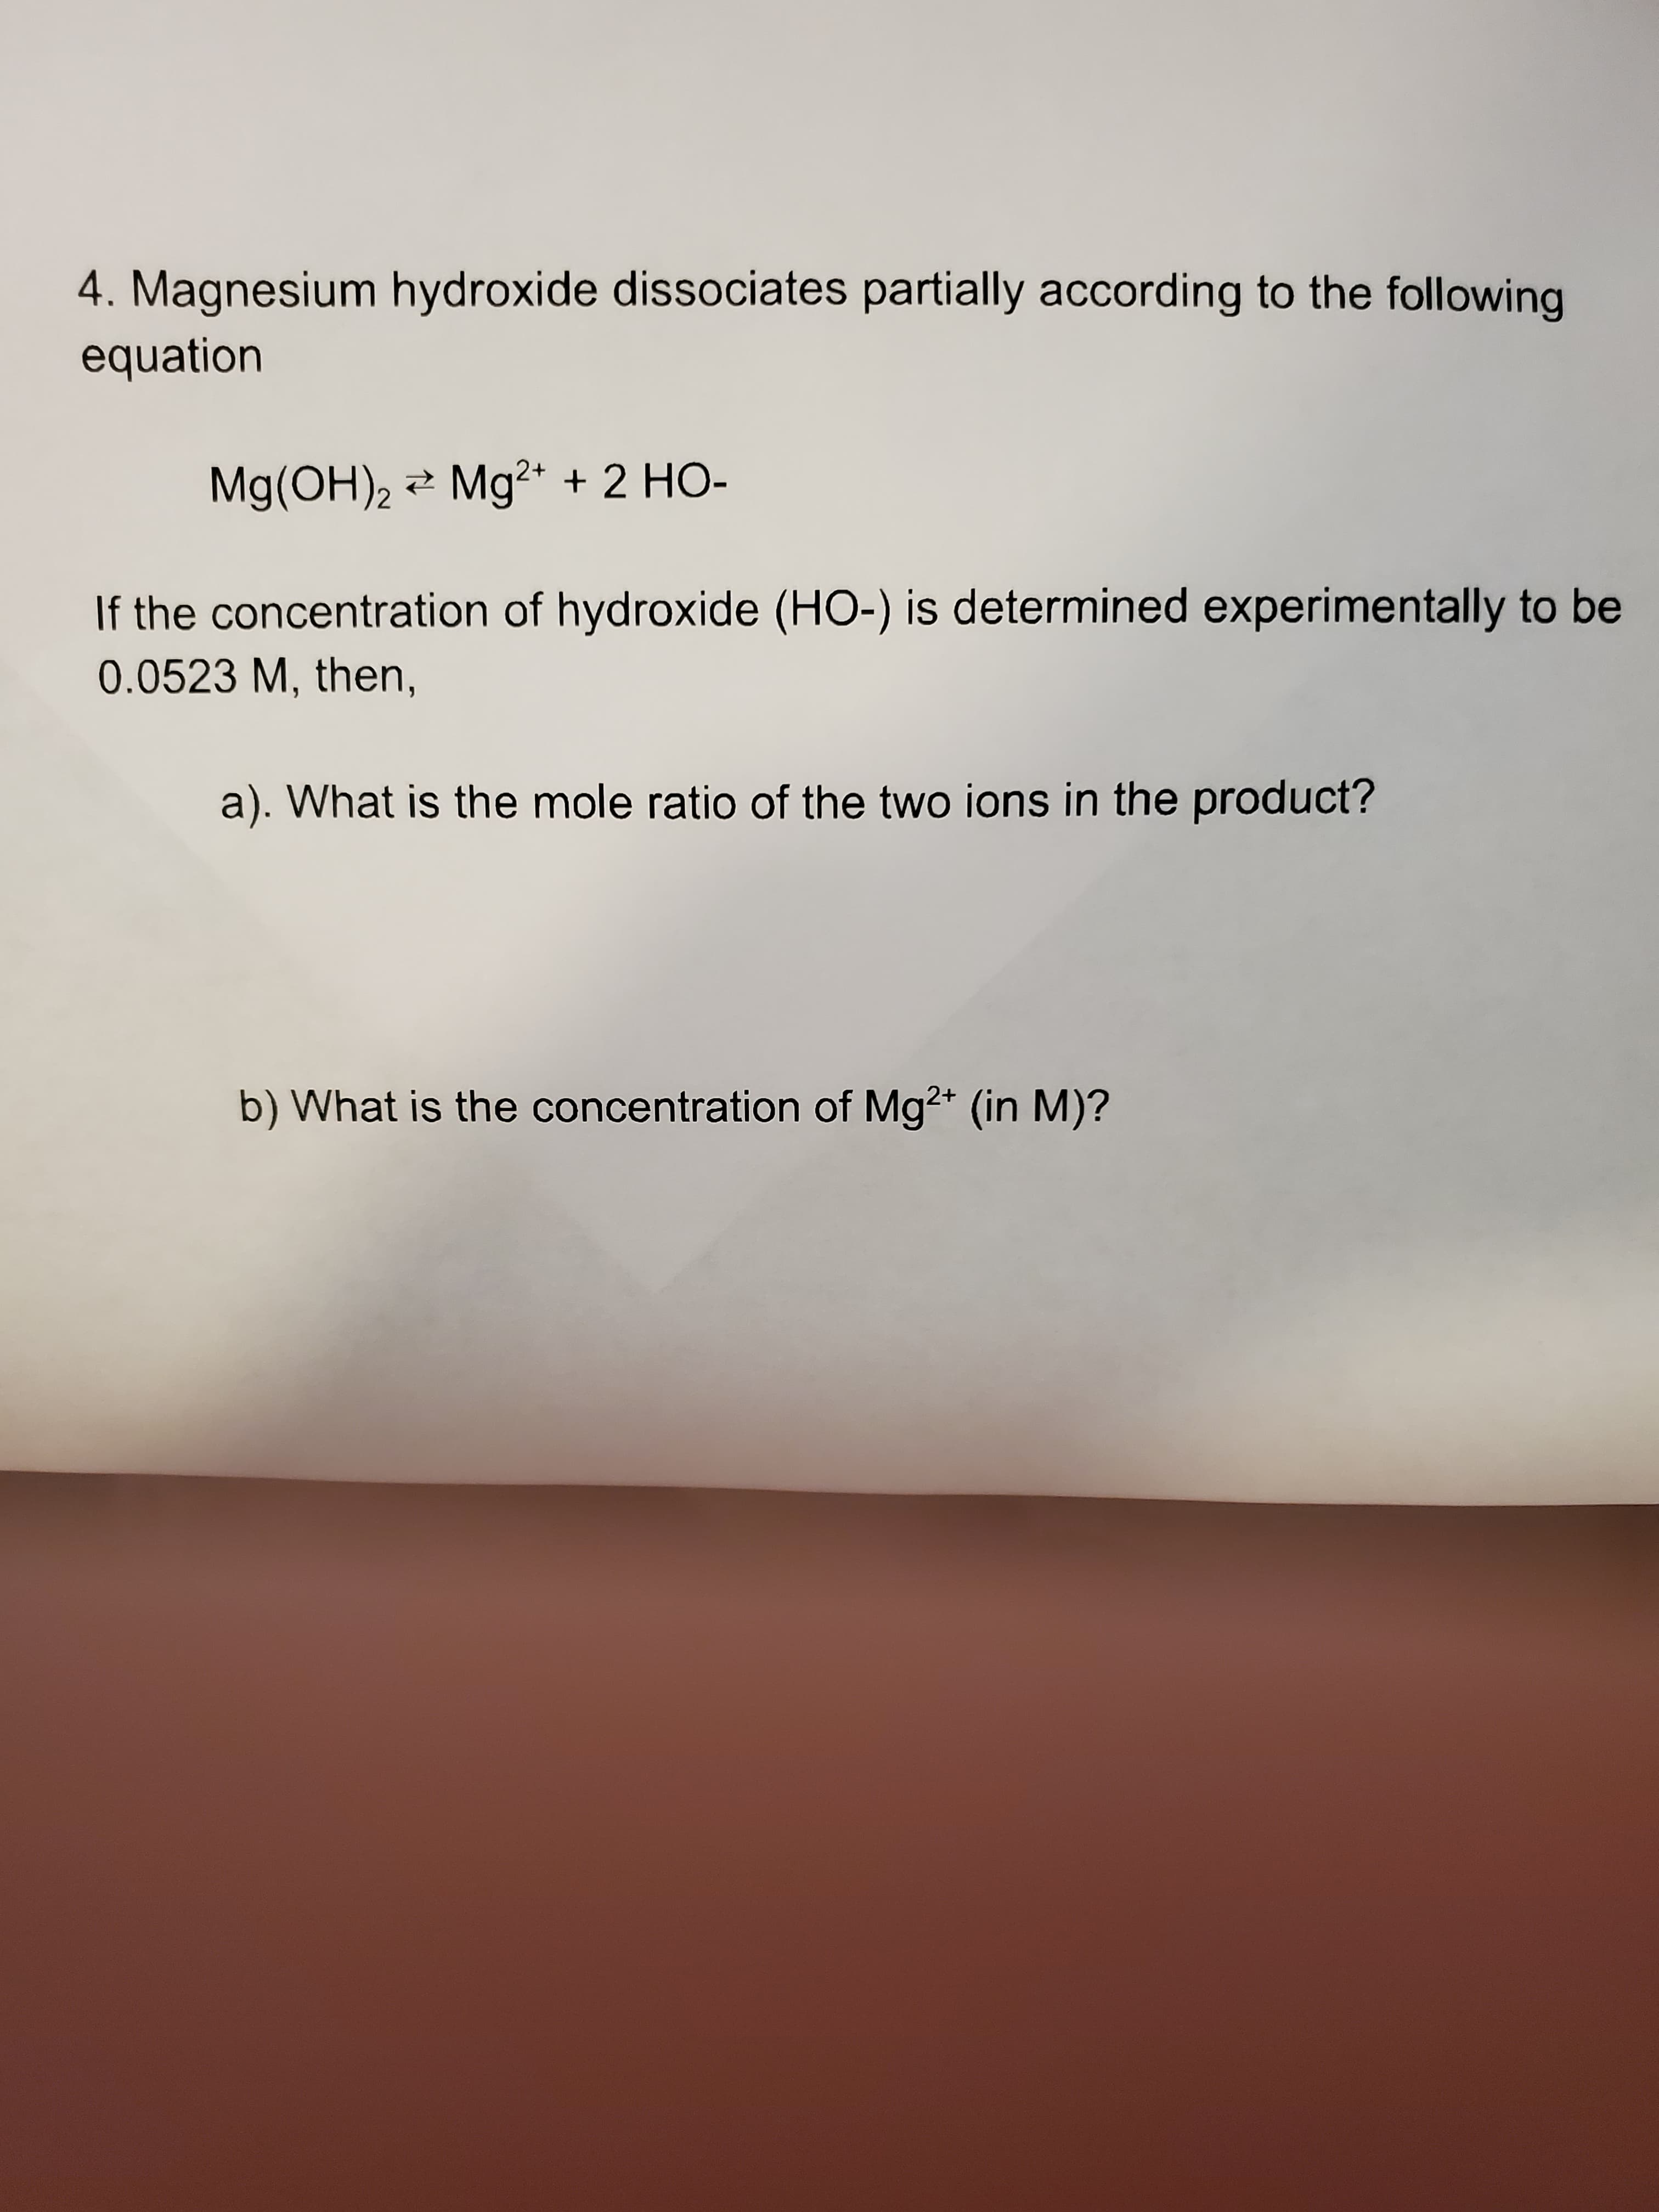 4. Magnesium hydroxide dissociates partially according to the following
equation
Mg(OH), 2 Mg2+ + 2 HO-
If the concentration of hydroxide (HO-) is determined experimentally to be
0.0523 M, then,
a). What is the mole ratio of the two ions in the product?
b) What is the concentration of Mg2* (in M)?
